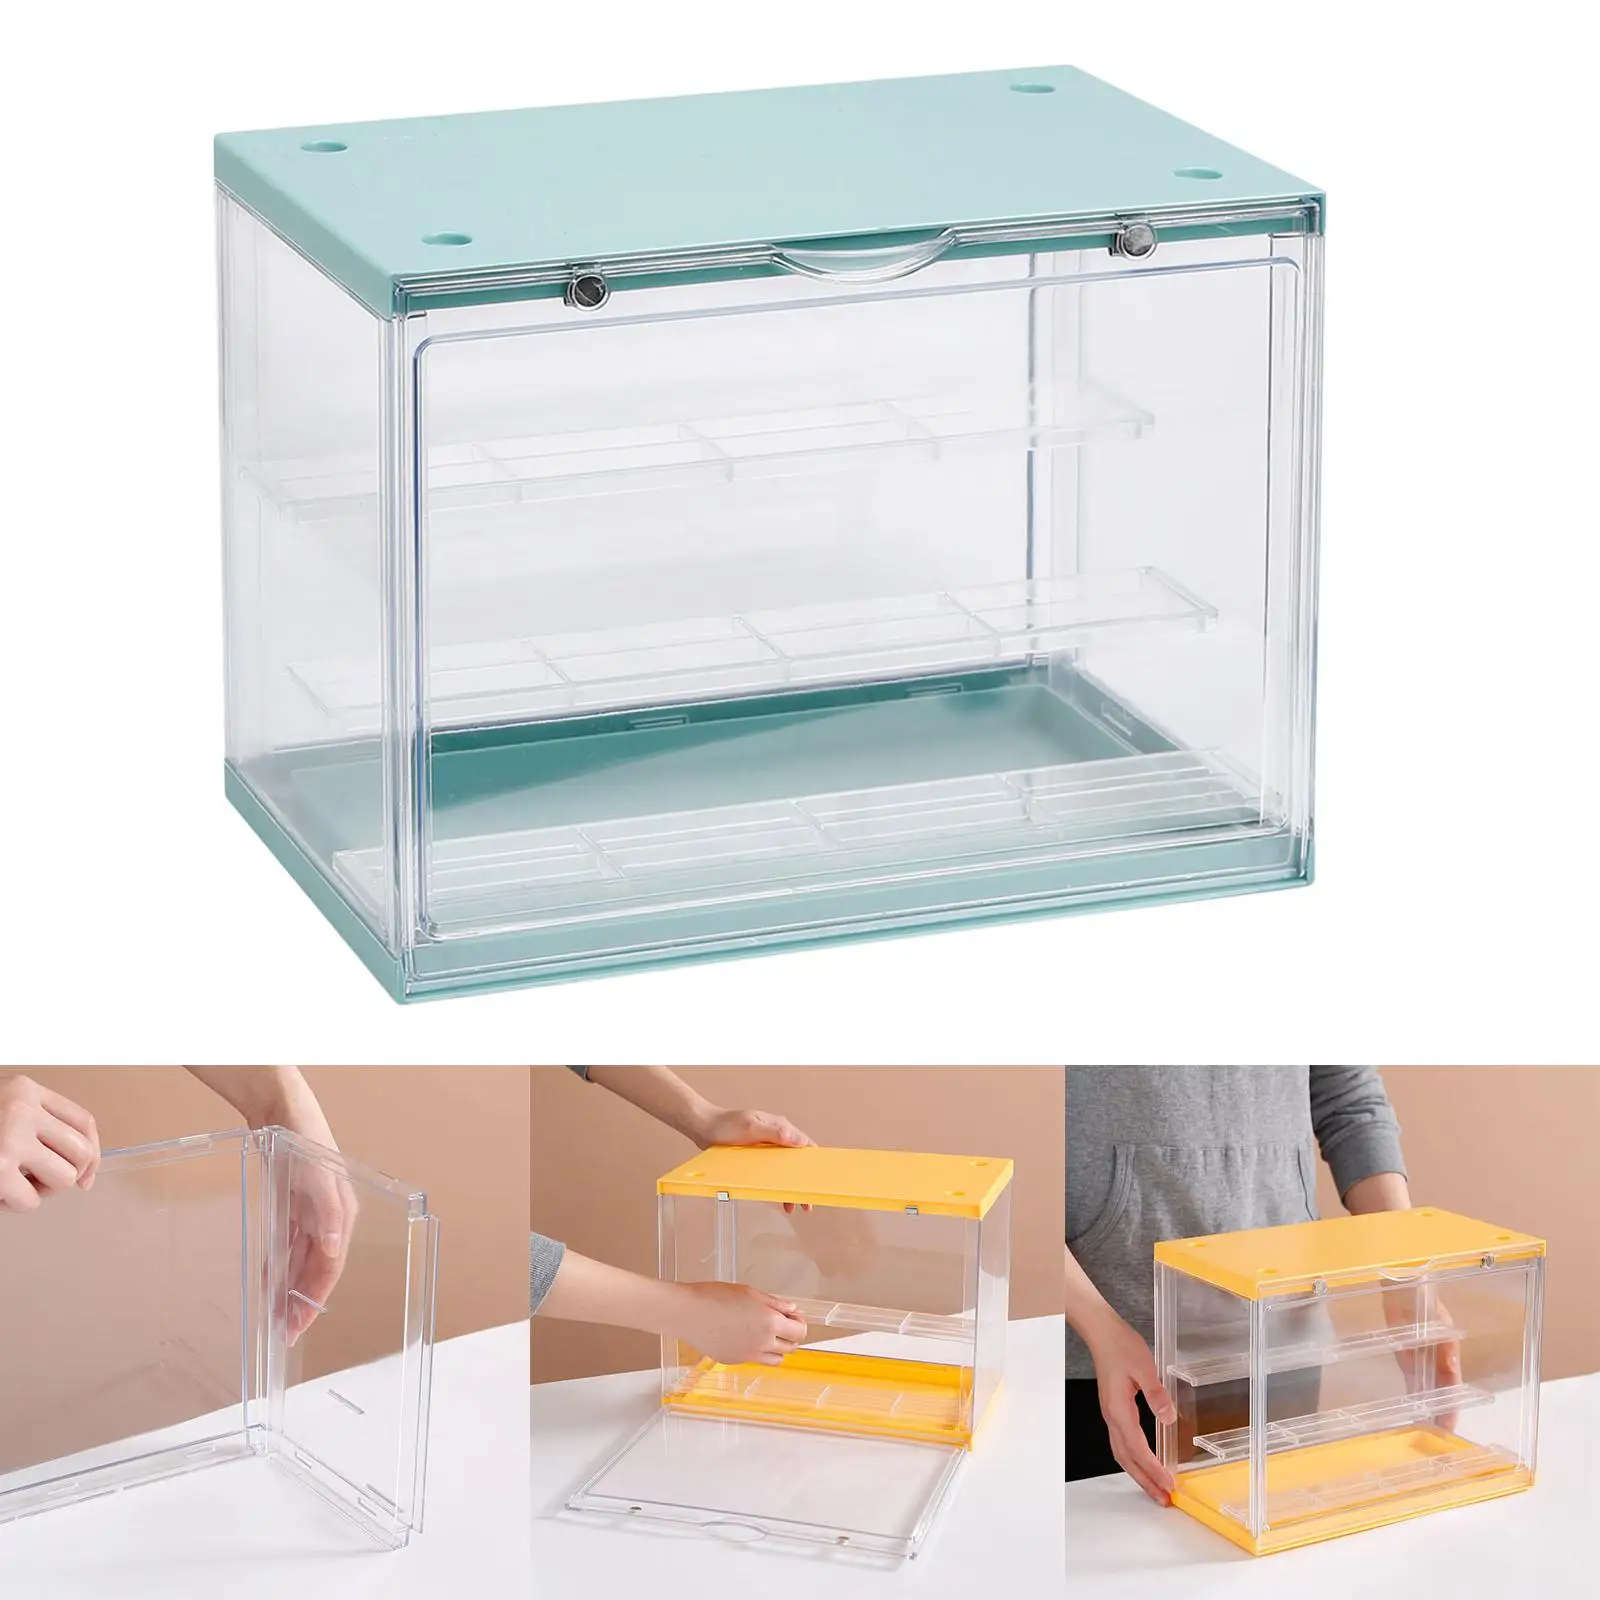  Case Dustproof Showcase for Action Figures, Assembly Countertop Cube Organizer